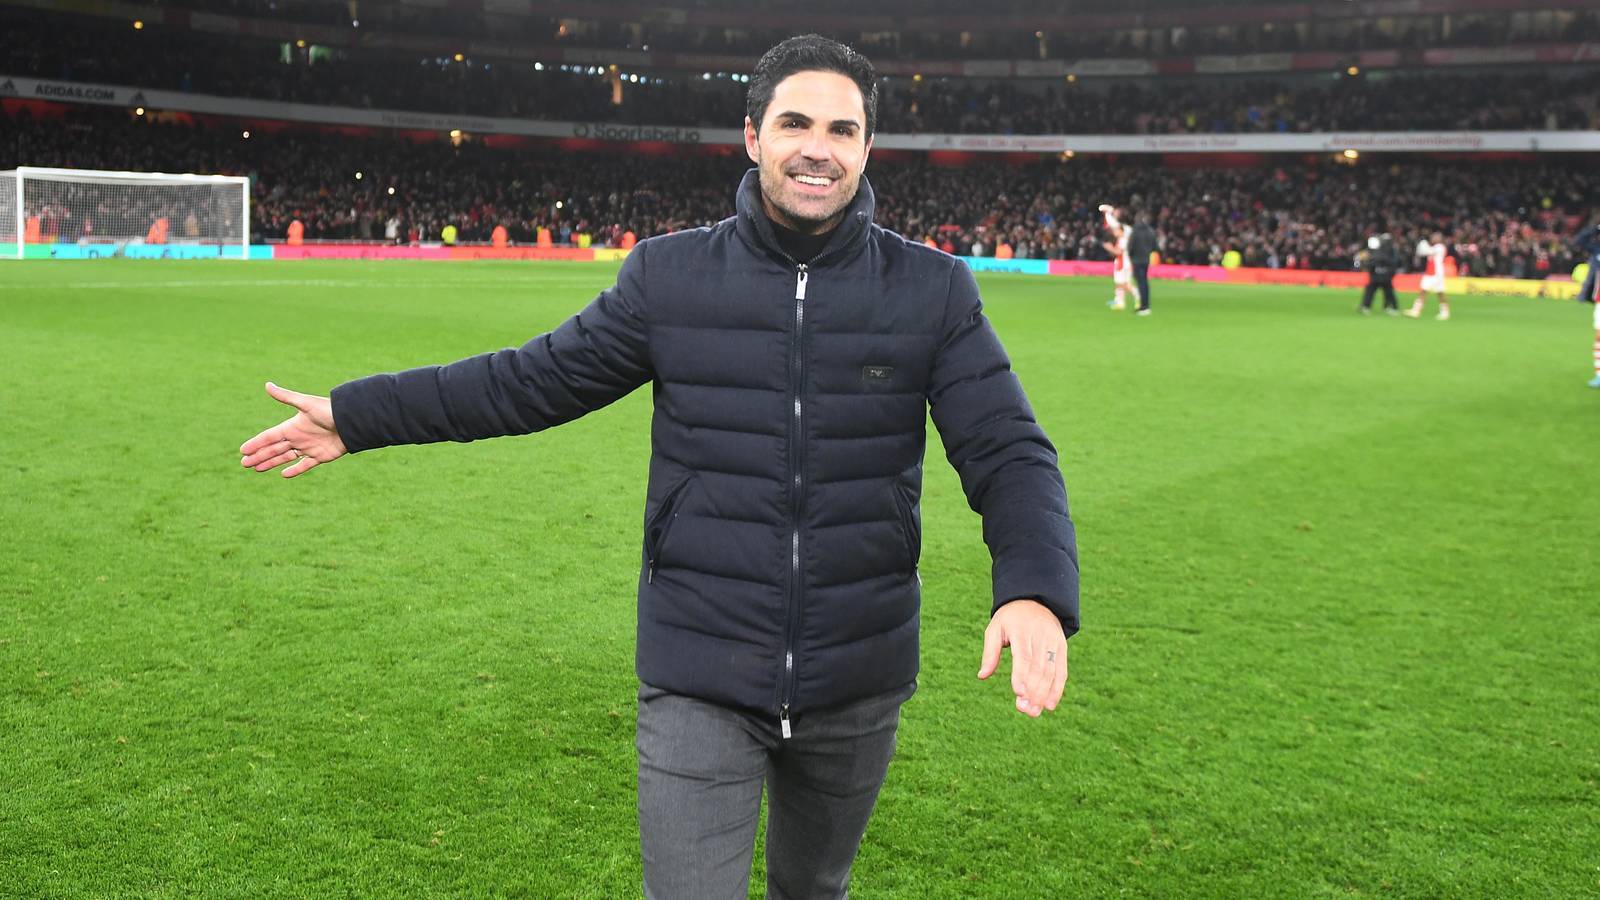 Mikel Arteta explains how his family and dogs have helped him in his first full season at Arsenal